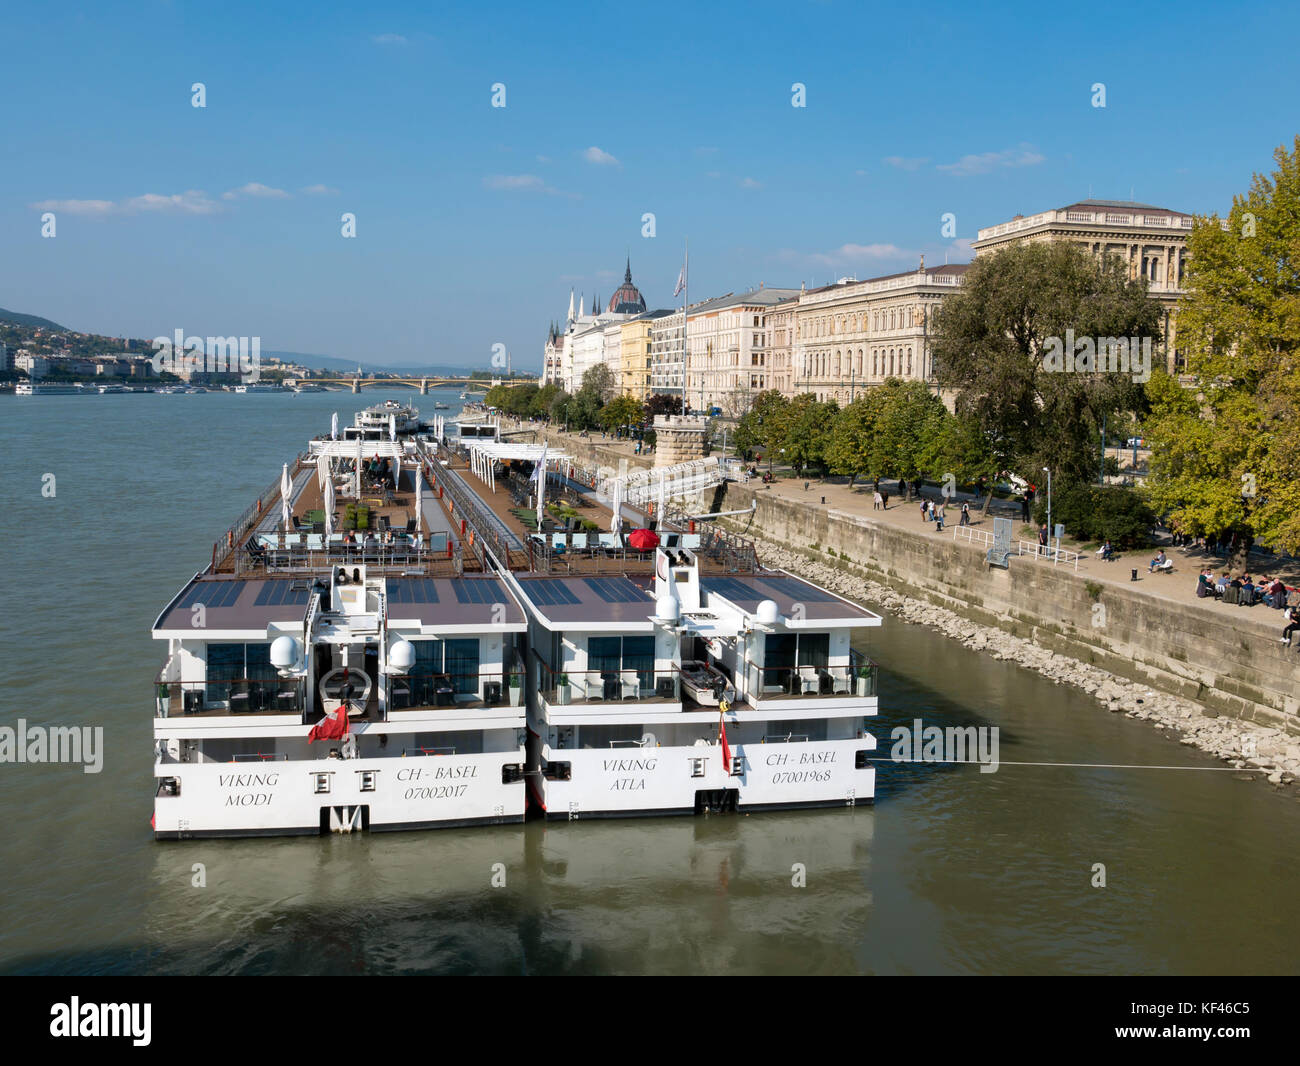 Viking River Cruise boats moored on the River Danube, Budapest, Hungary. Stock Photo